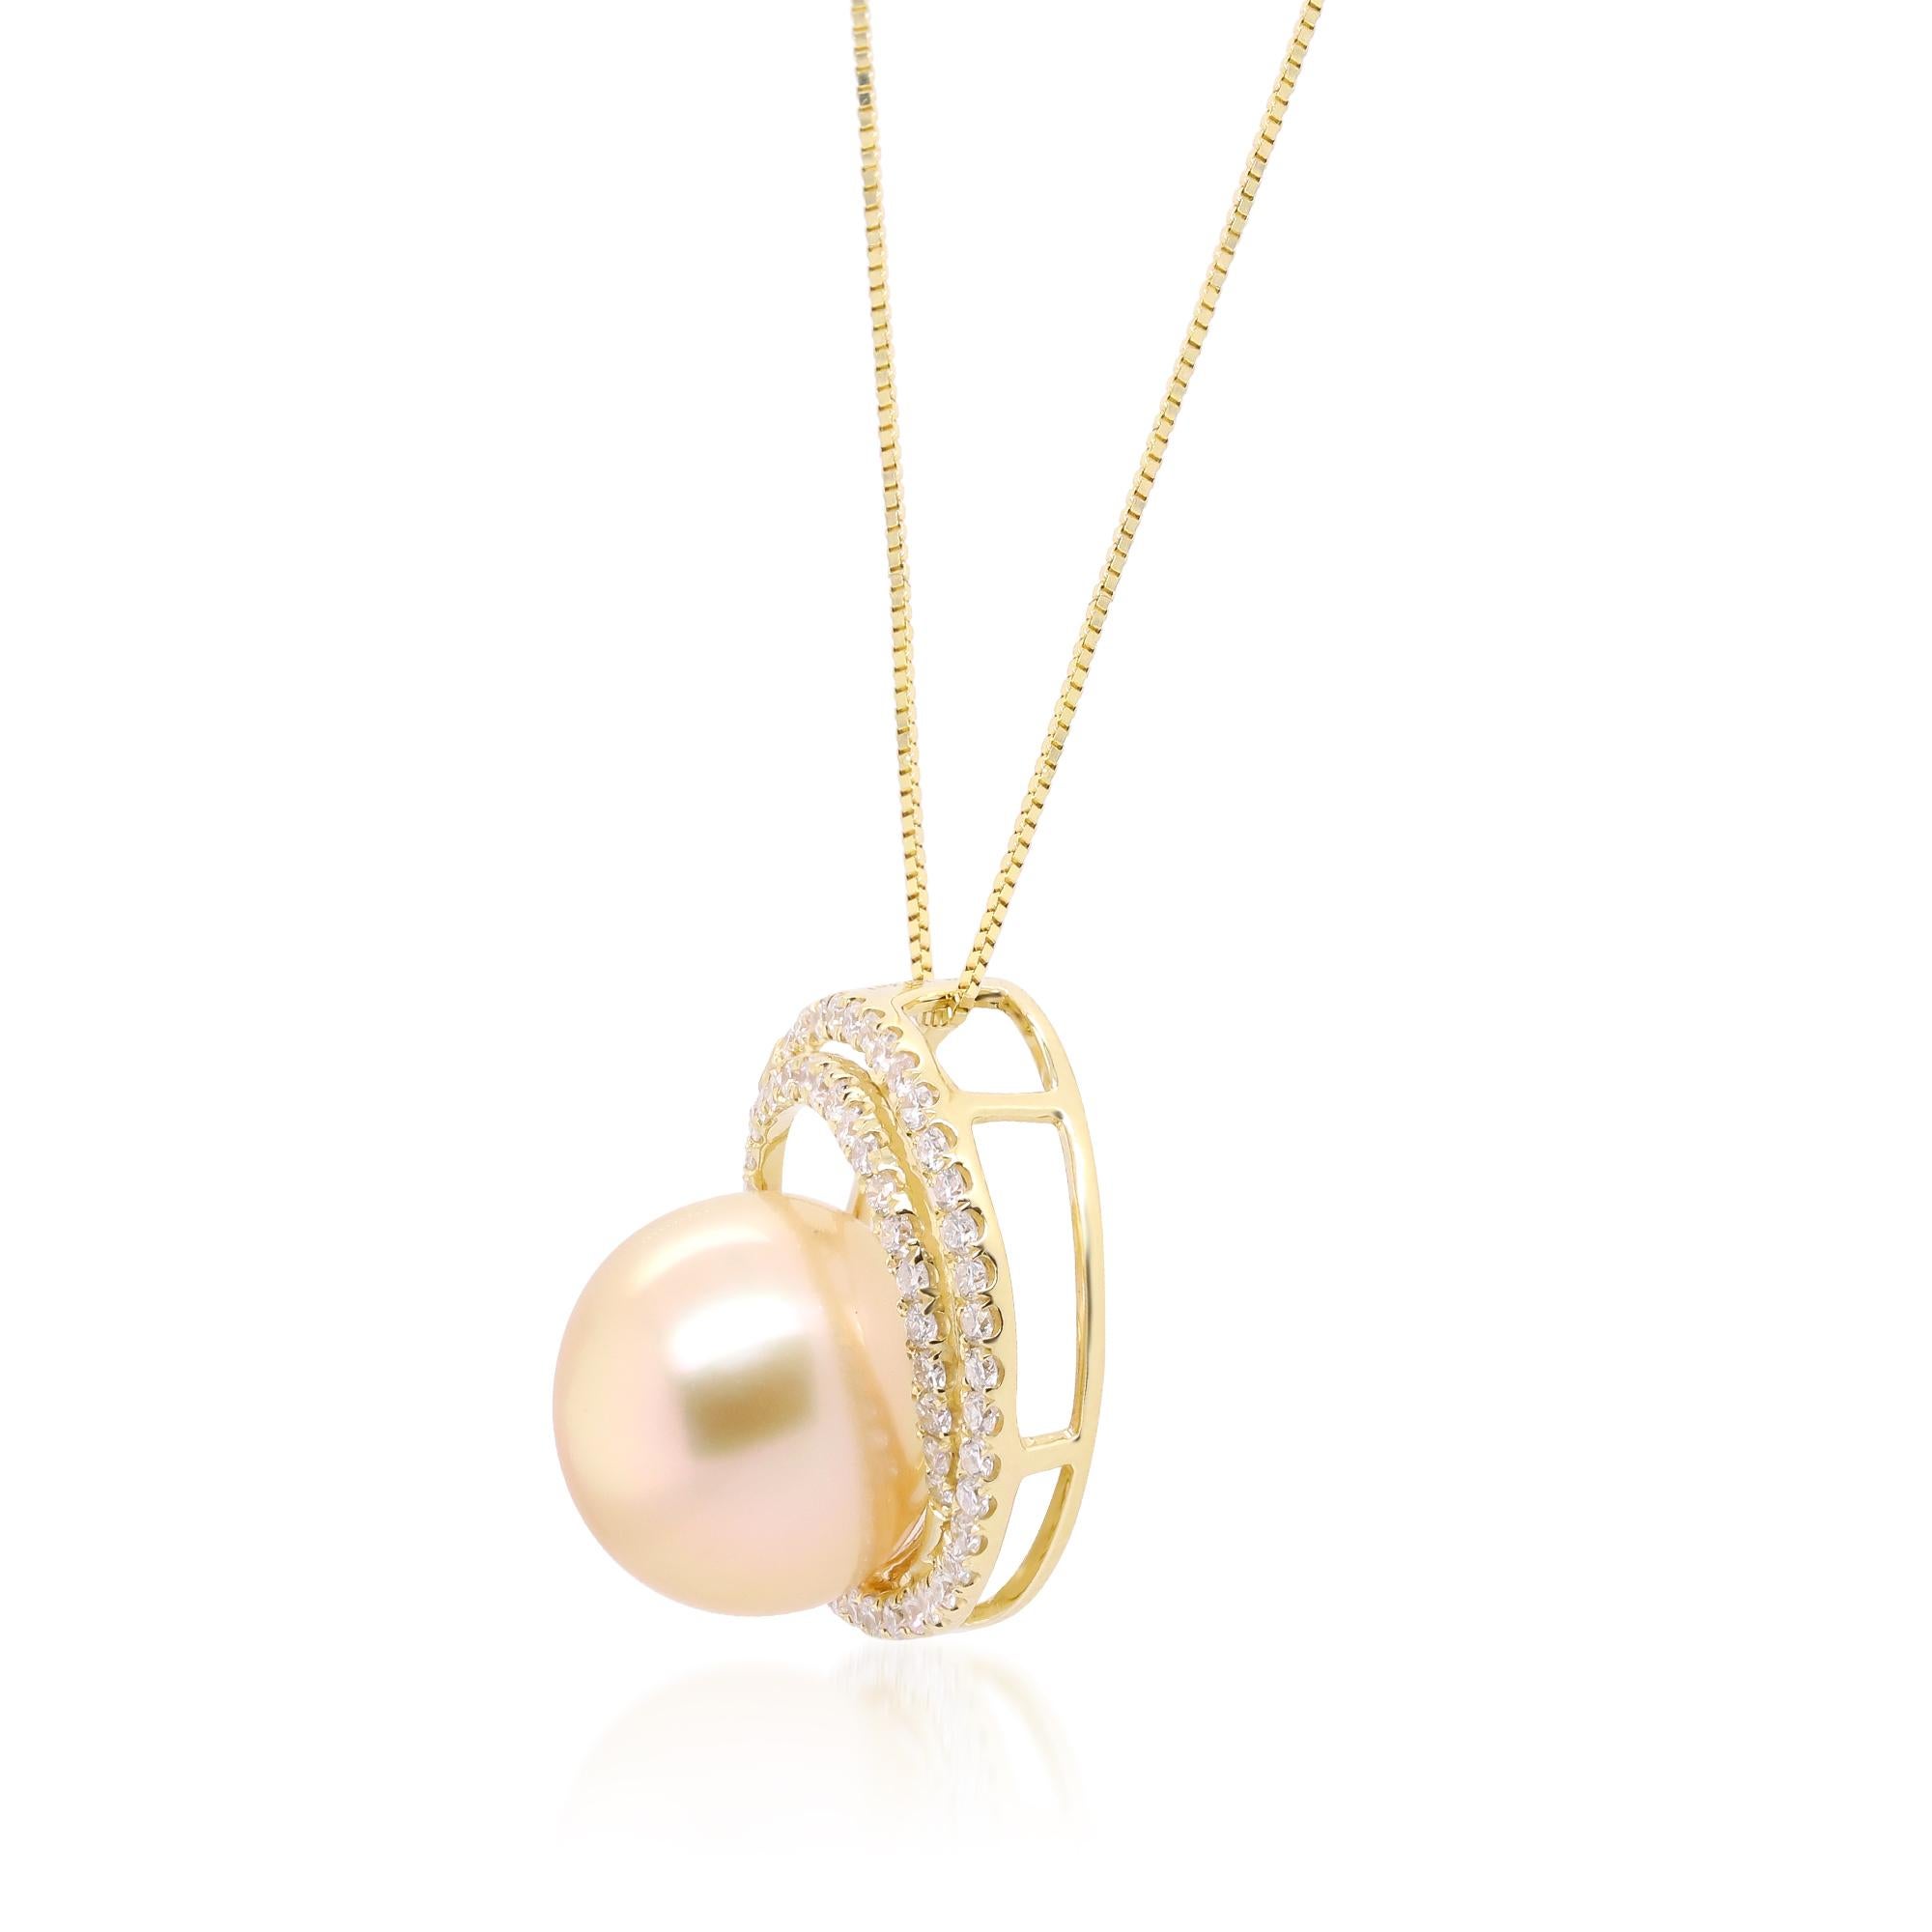 Stunning, timeless and classy eternity Unique Pendant. Decorate yourself in luxury with this Gin & Grace Pendant. This Pendant is made up of Round-cab Prong Setting South Sea Pearl (1 pcs) 13.29 Carat and Round-Cut Prong Setting Diamond (56 pcs)